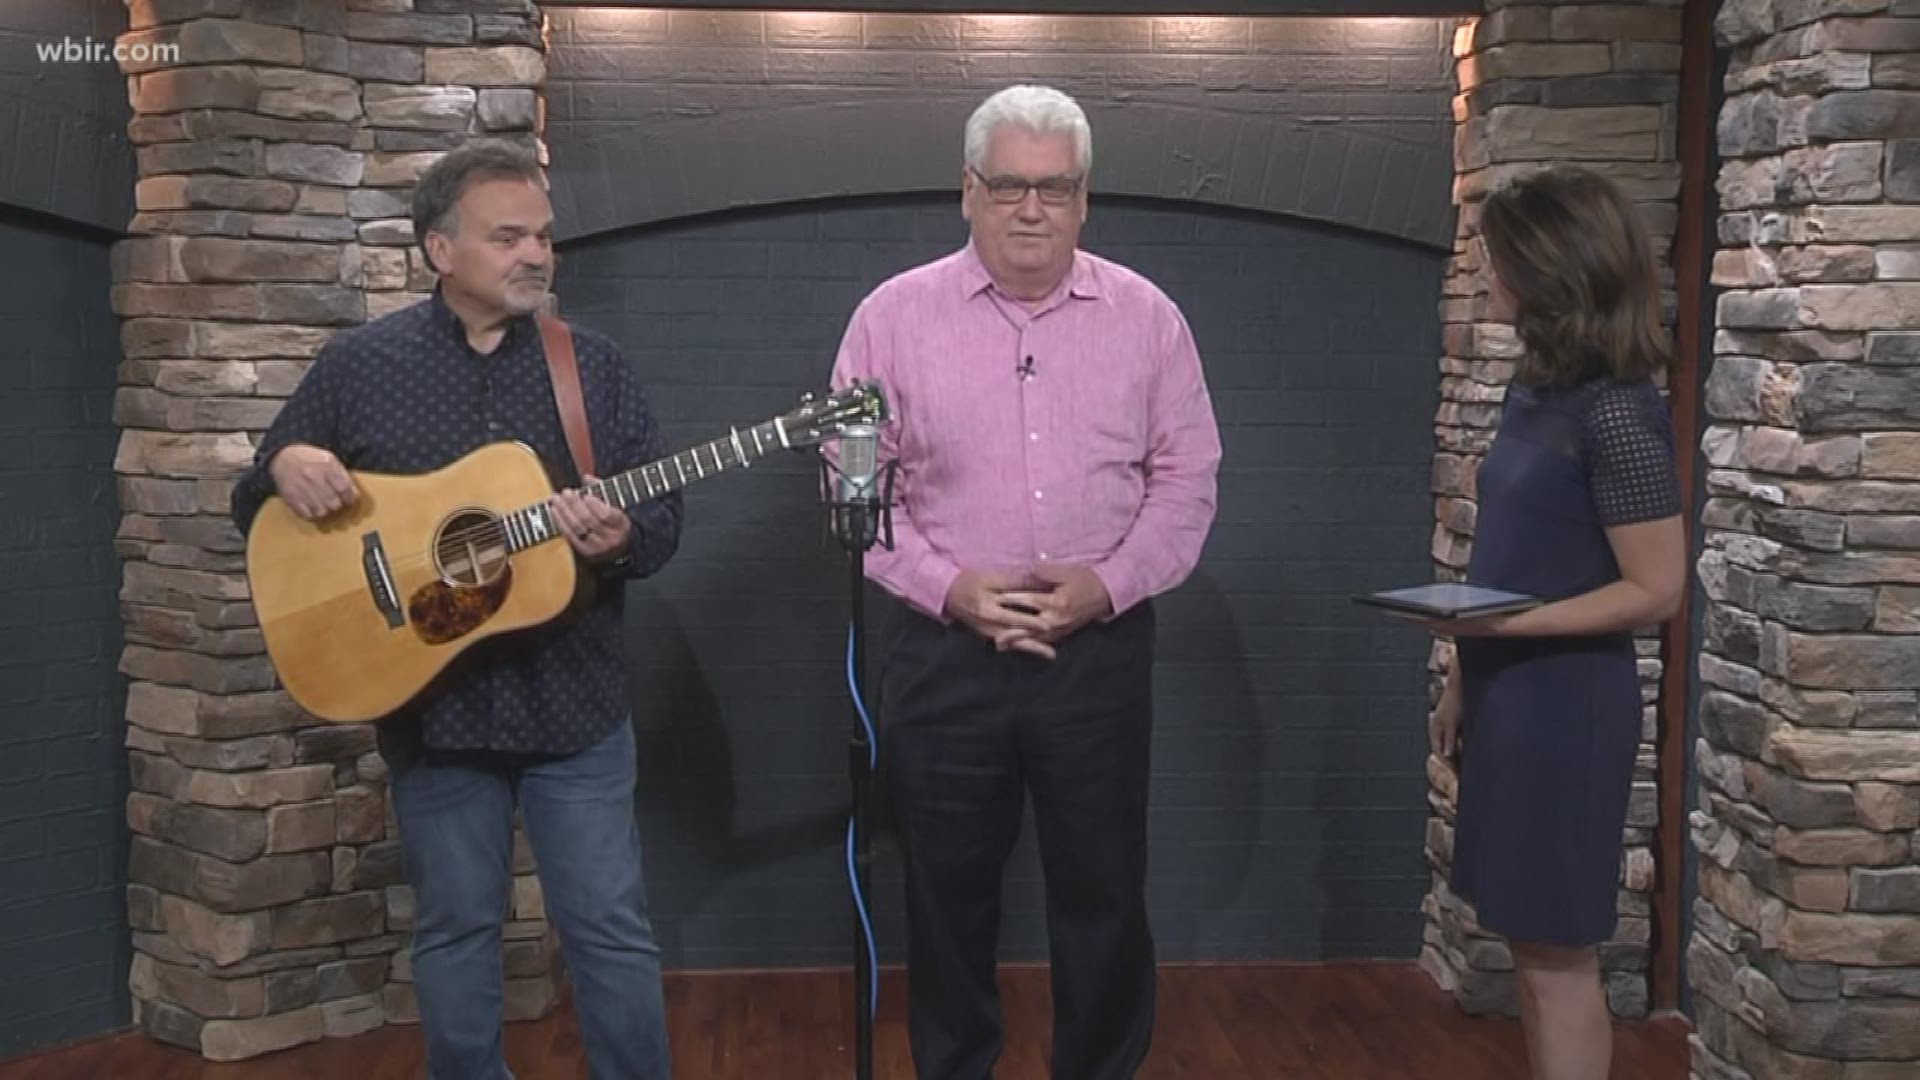 WDVX and ORNL Federal Credit Union present The Summer Sessions at Bissell Park in Oak Ridge. The Summer Sessions are free & begin at 6pm. Kicks off on June 15 with Jim Lauderdale. Others to include: JULY 13 – Circus #9 / Travelin' McCoury's
AUGUST  17 – Ricky Skaggs / Blue Moon Rising
SEPTEMBER 14 – Molly Tuttle / Alex Leach. Visit wdvx.com to learn more. June 11, 2019-4pm.